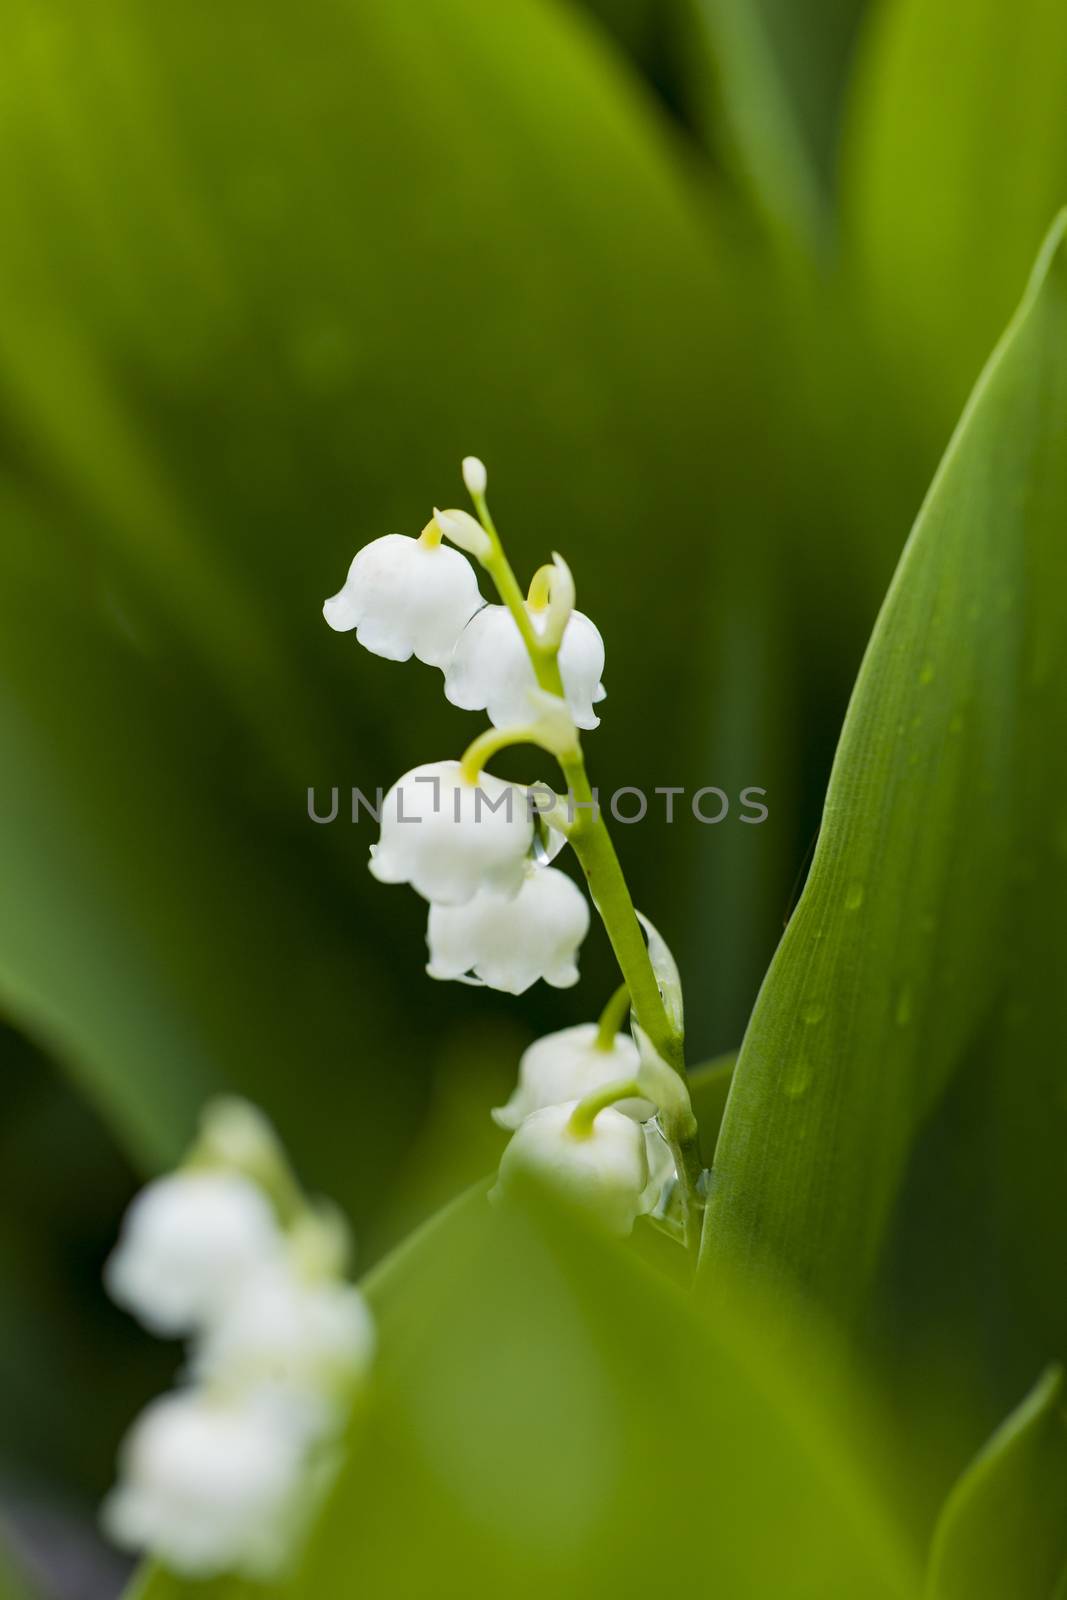 Lily of the valley flowers with water drops on green background. Convallaria majalis

